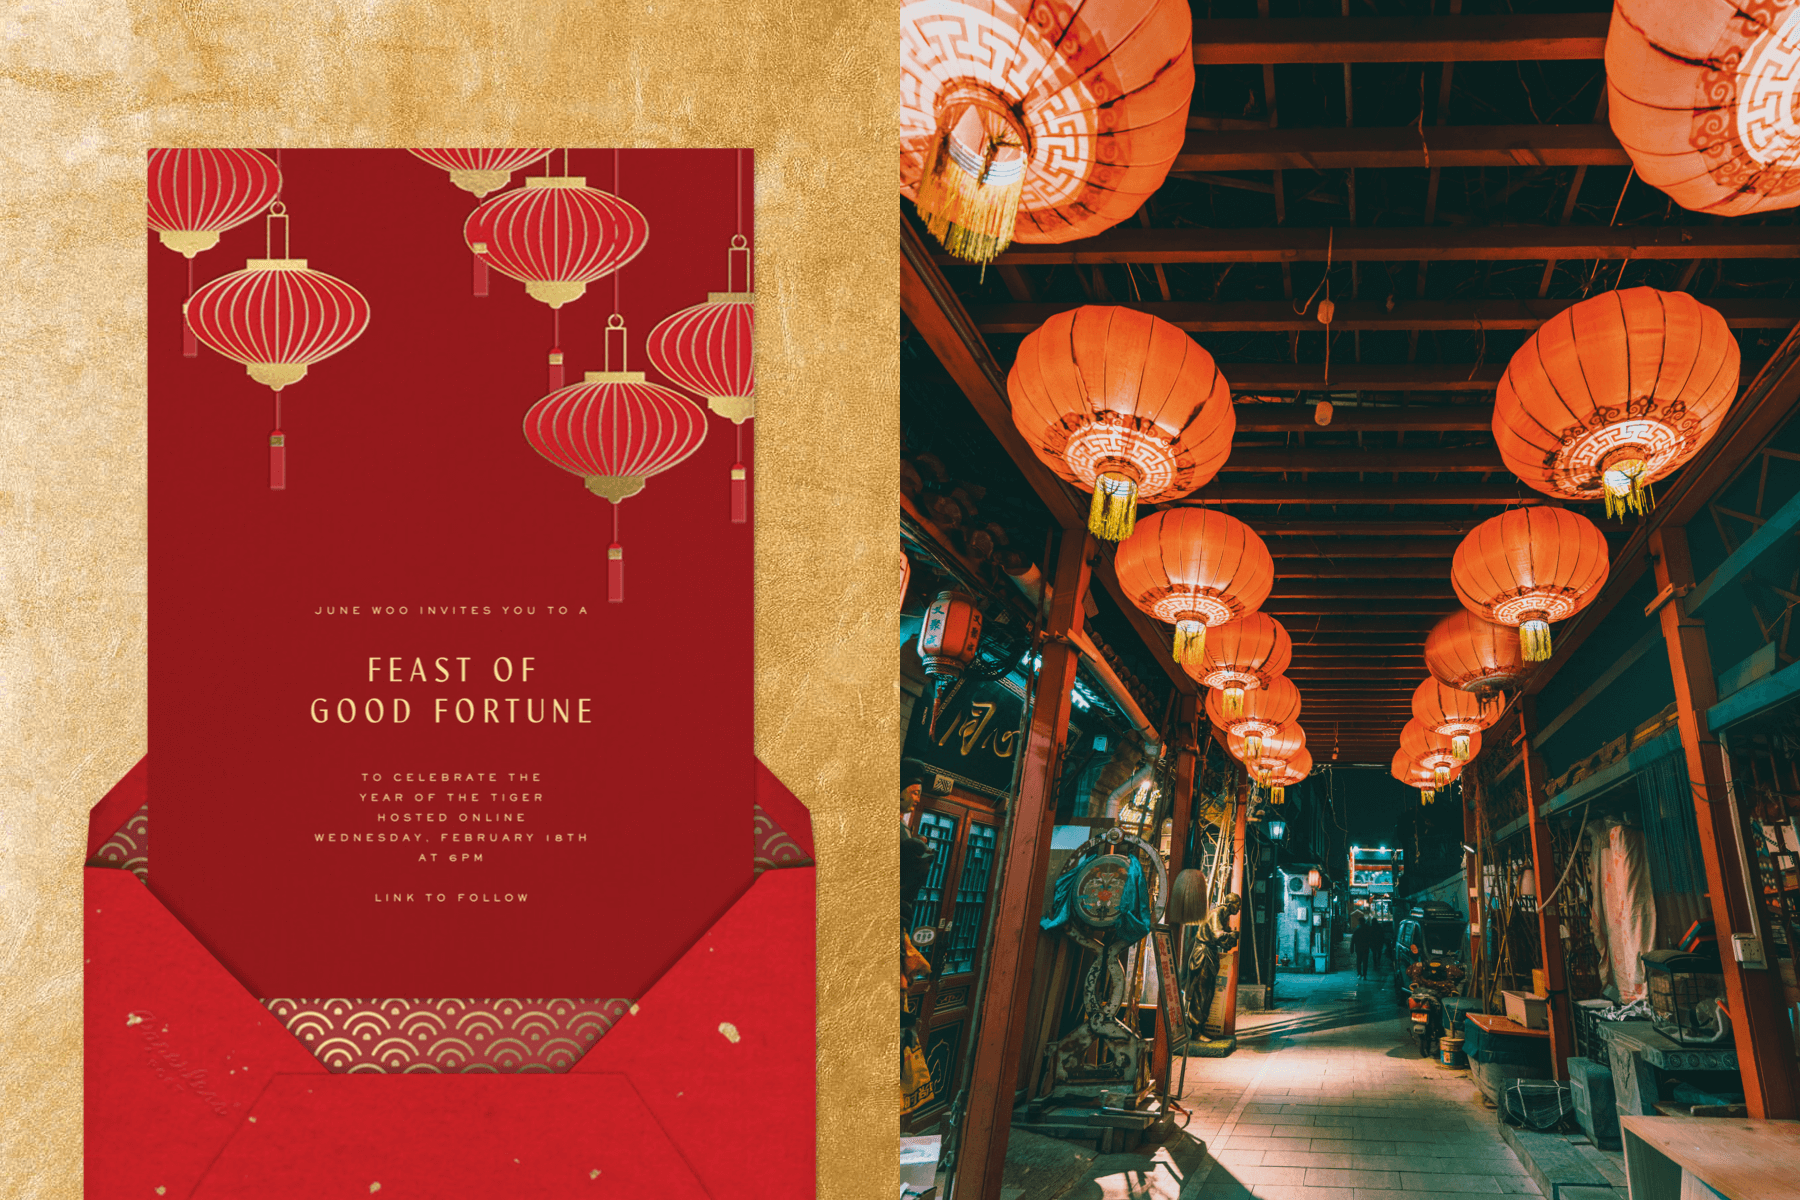 Left: A red Lunar New Year card featuring red lanterns. | Right: A hallway lined with red lanterns.